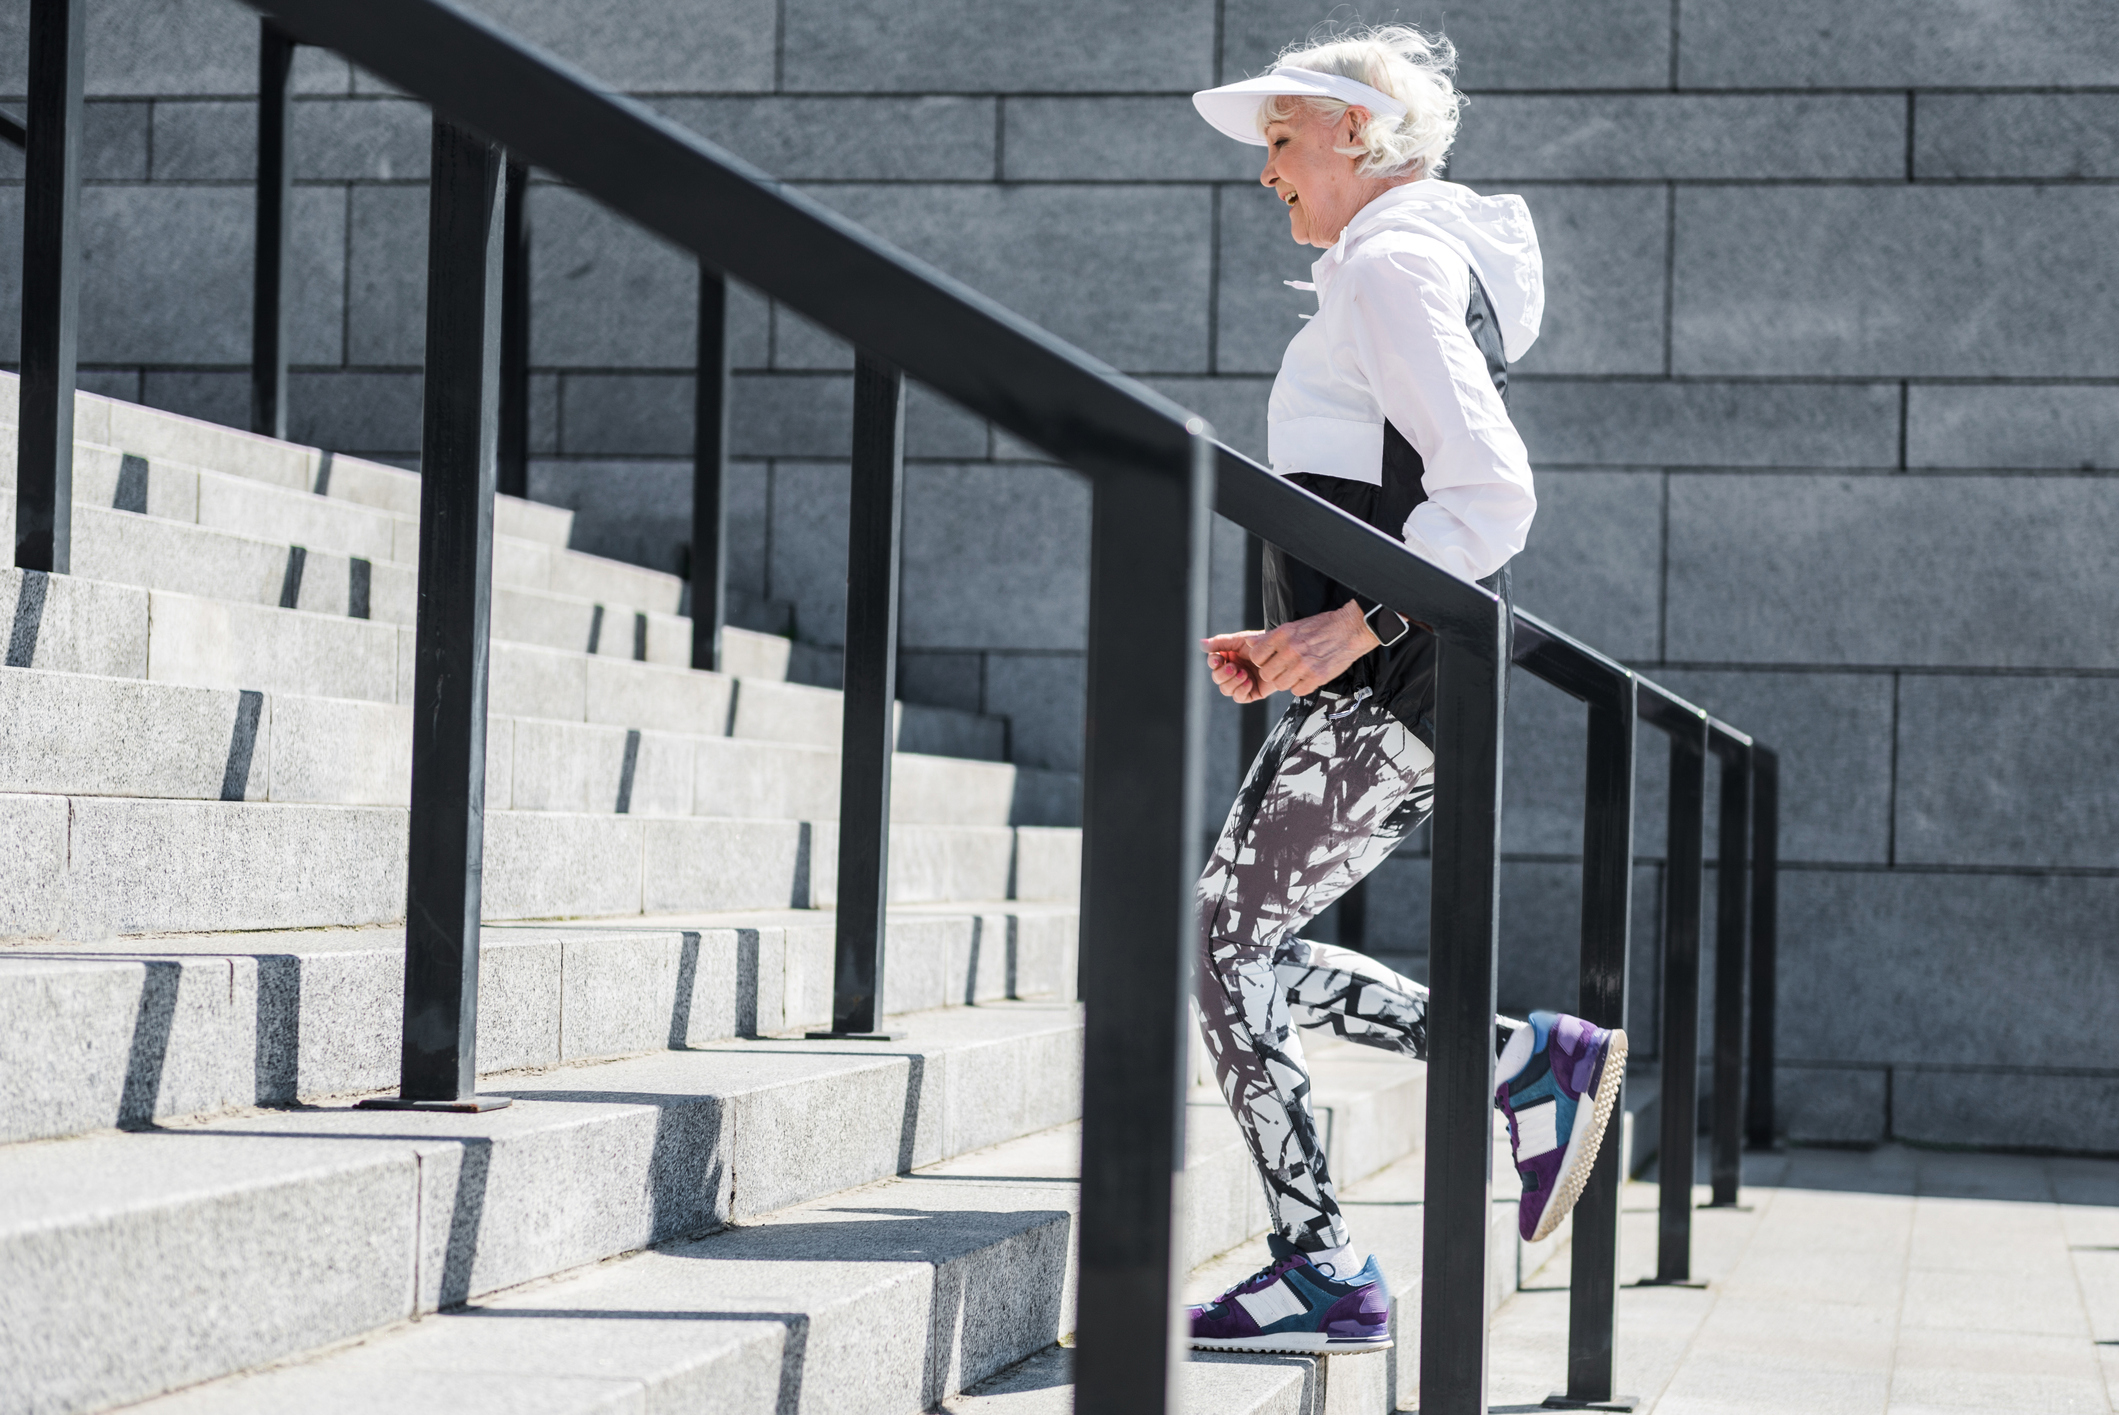 Cheerful-old-lady-training-to-run-up-concrete-stairs-696208932_2123x1417.jpeg